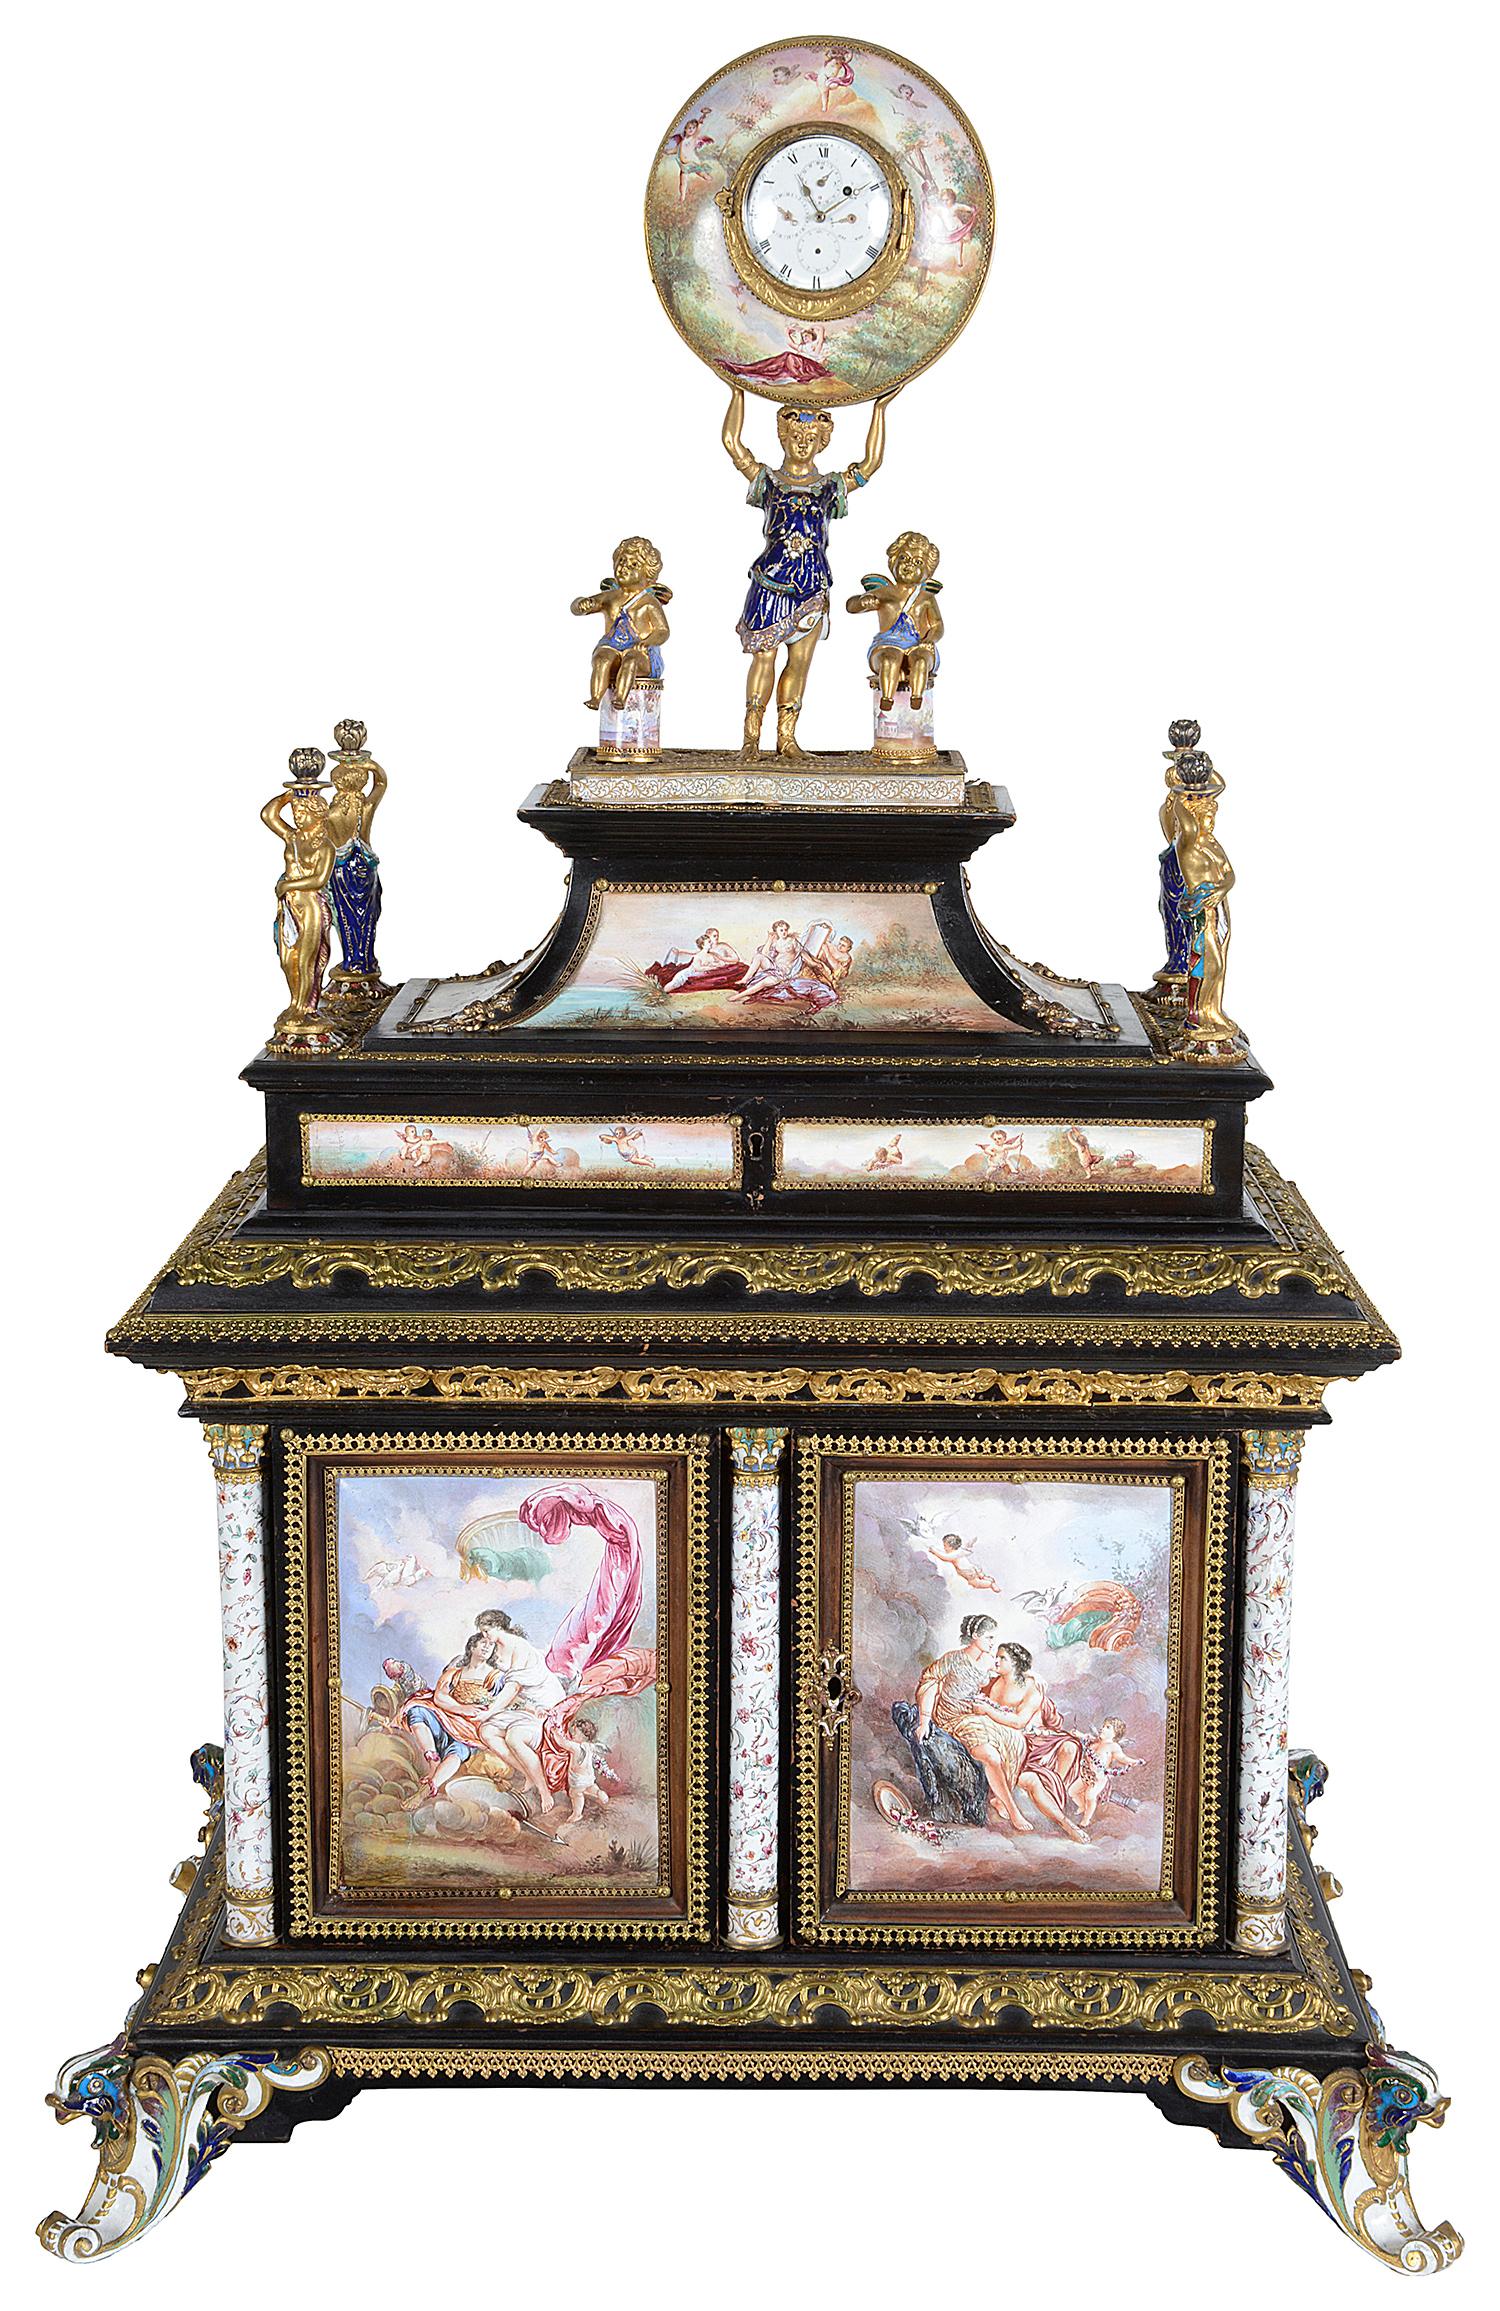 A very impressive 19th century Viennese enamel table cabinet having gilded ormolu semi clad maidens surrounding two cherubs and a figure supporting a watch case.
Enamel panels around the cabinet depicting classical seductive scenes, two doors